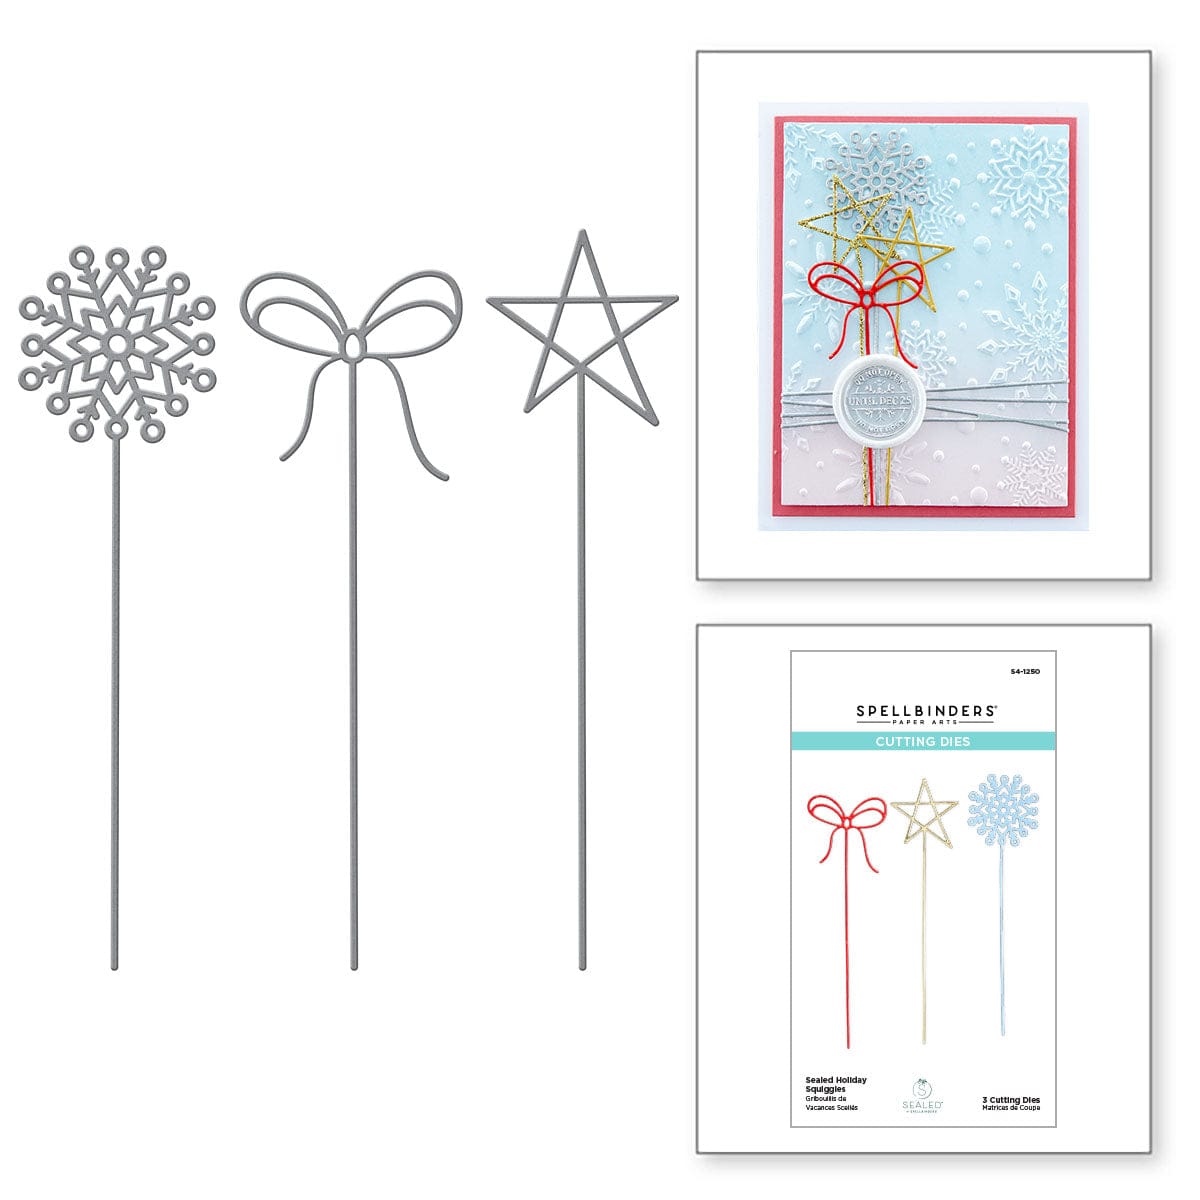 New Compatibility - Spellbinders Paper Arts